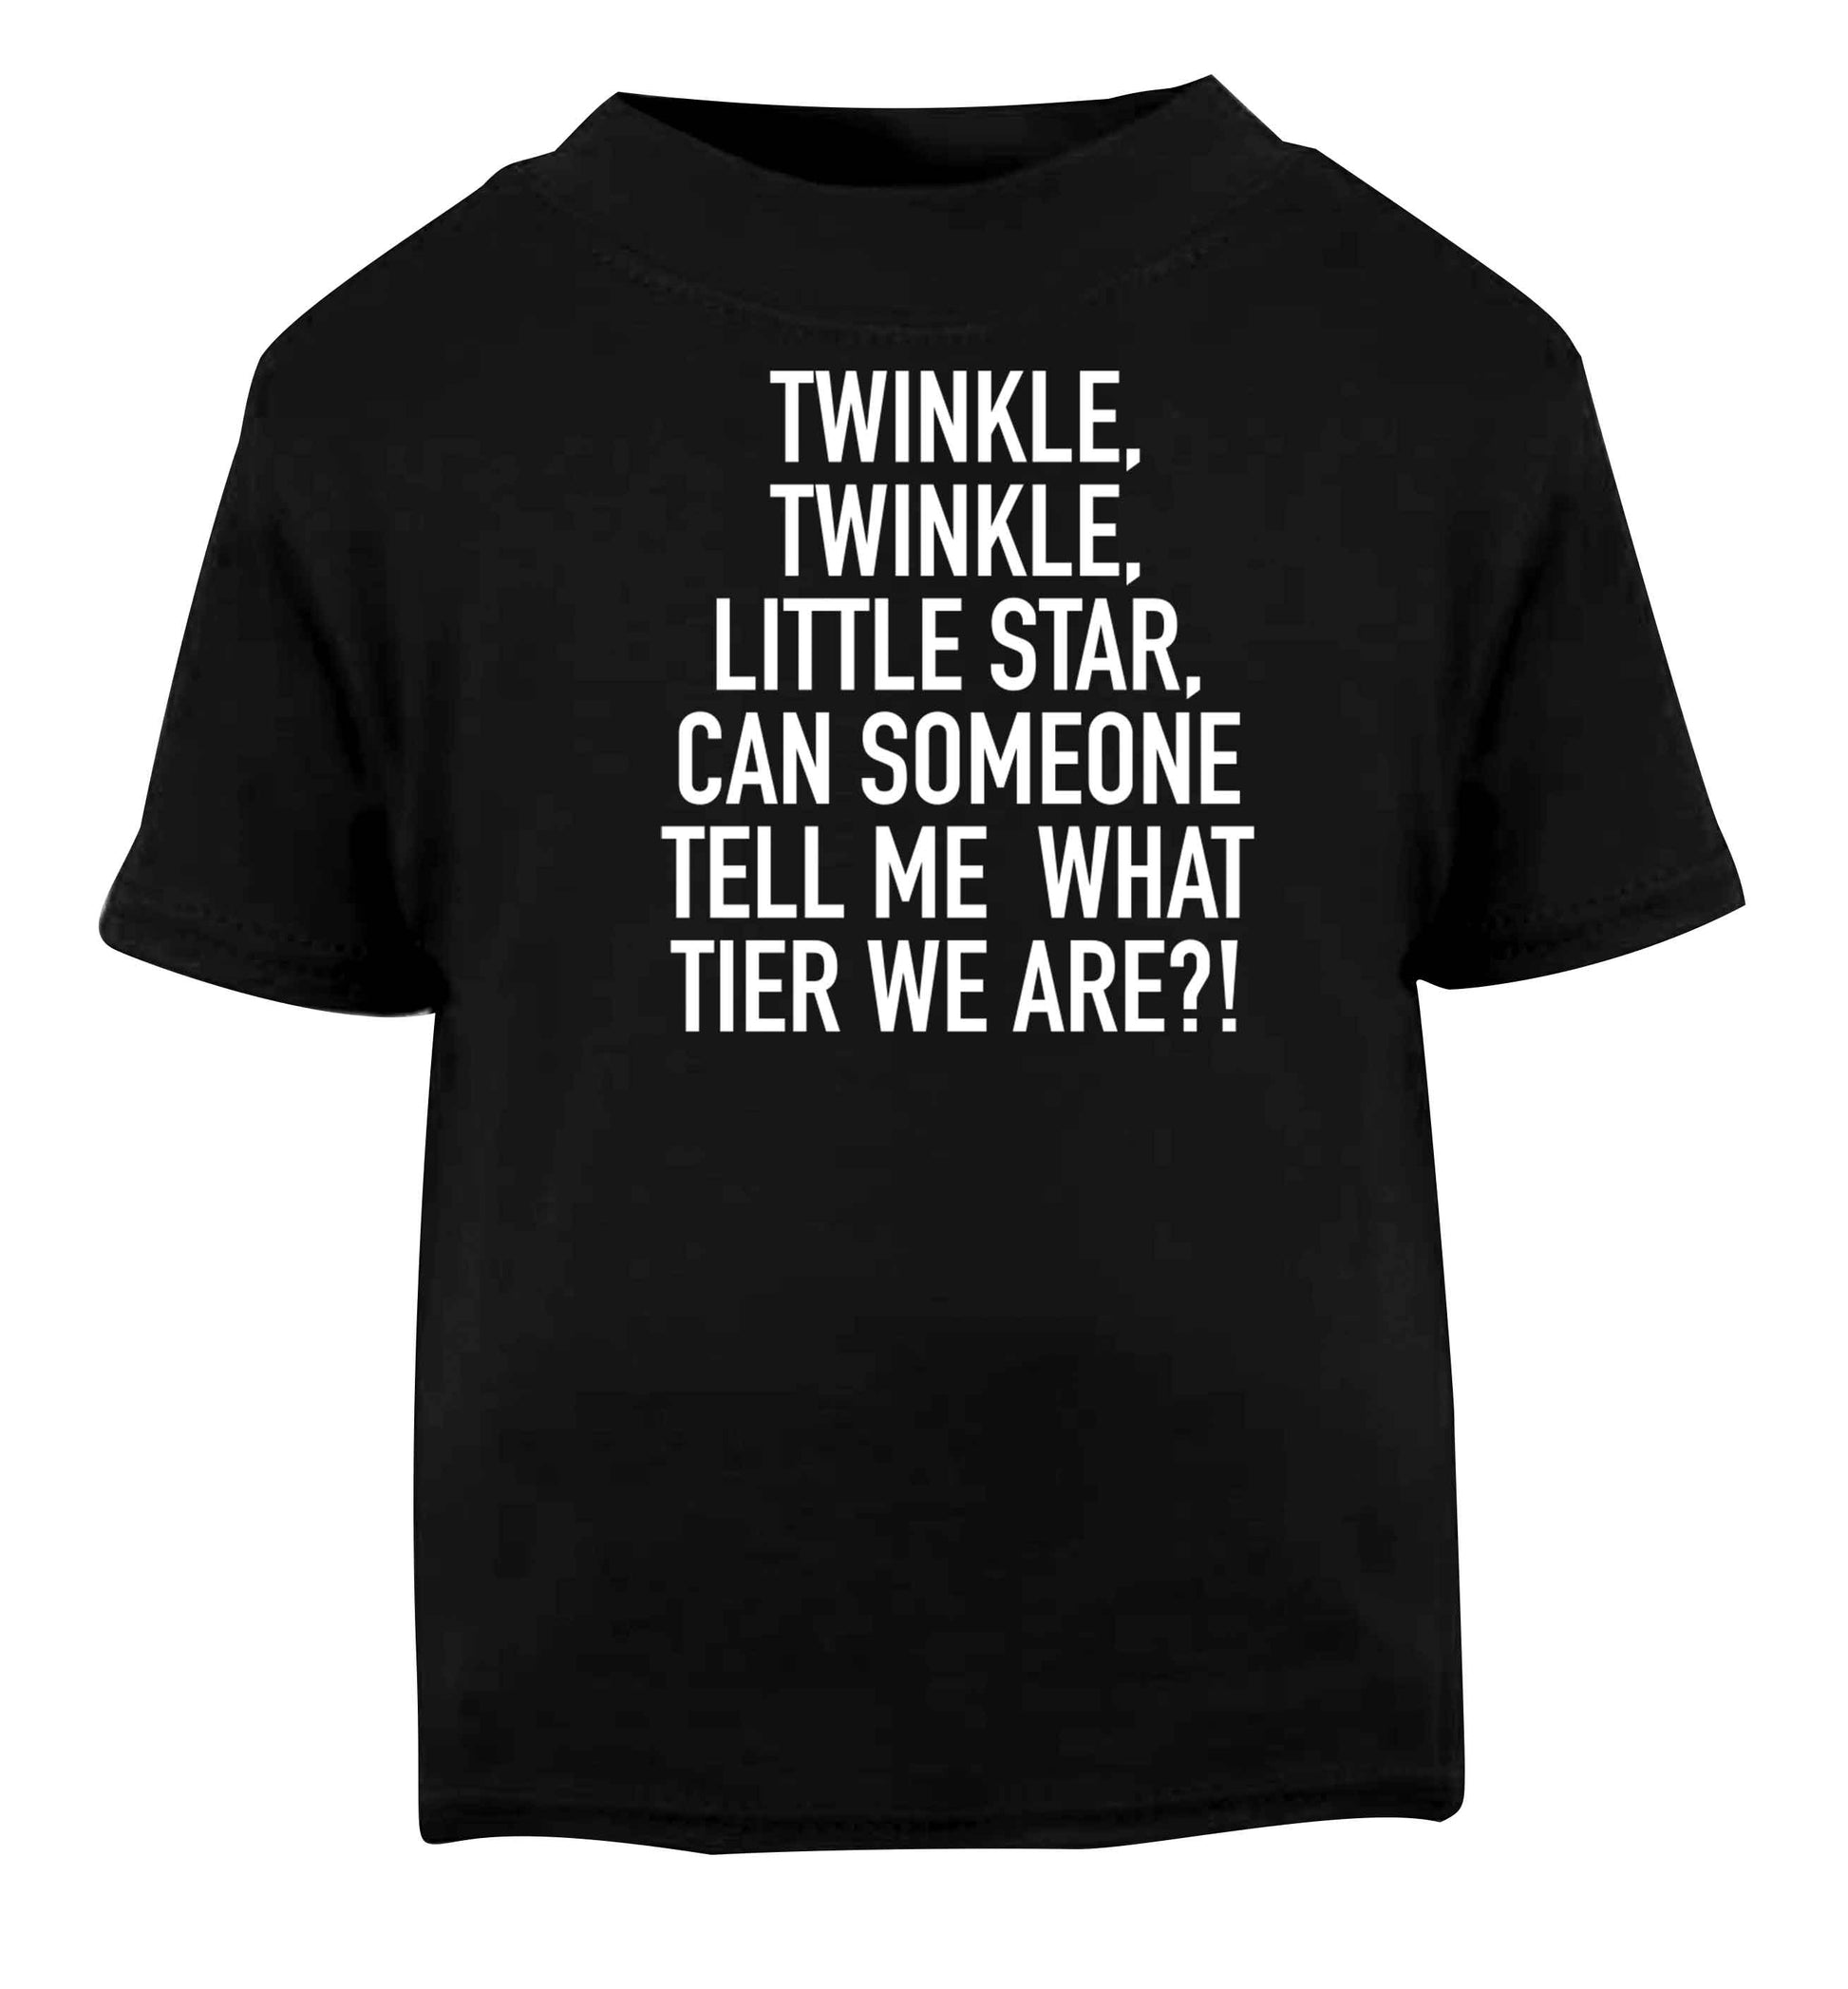 Twinkle twinkle, little star does anyone know what tier we are? Black baby toddler Tshirt 2 years